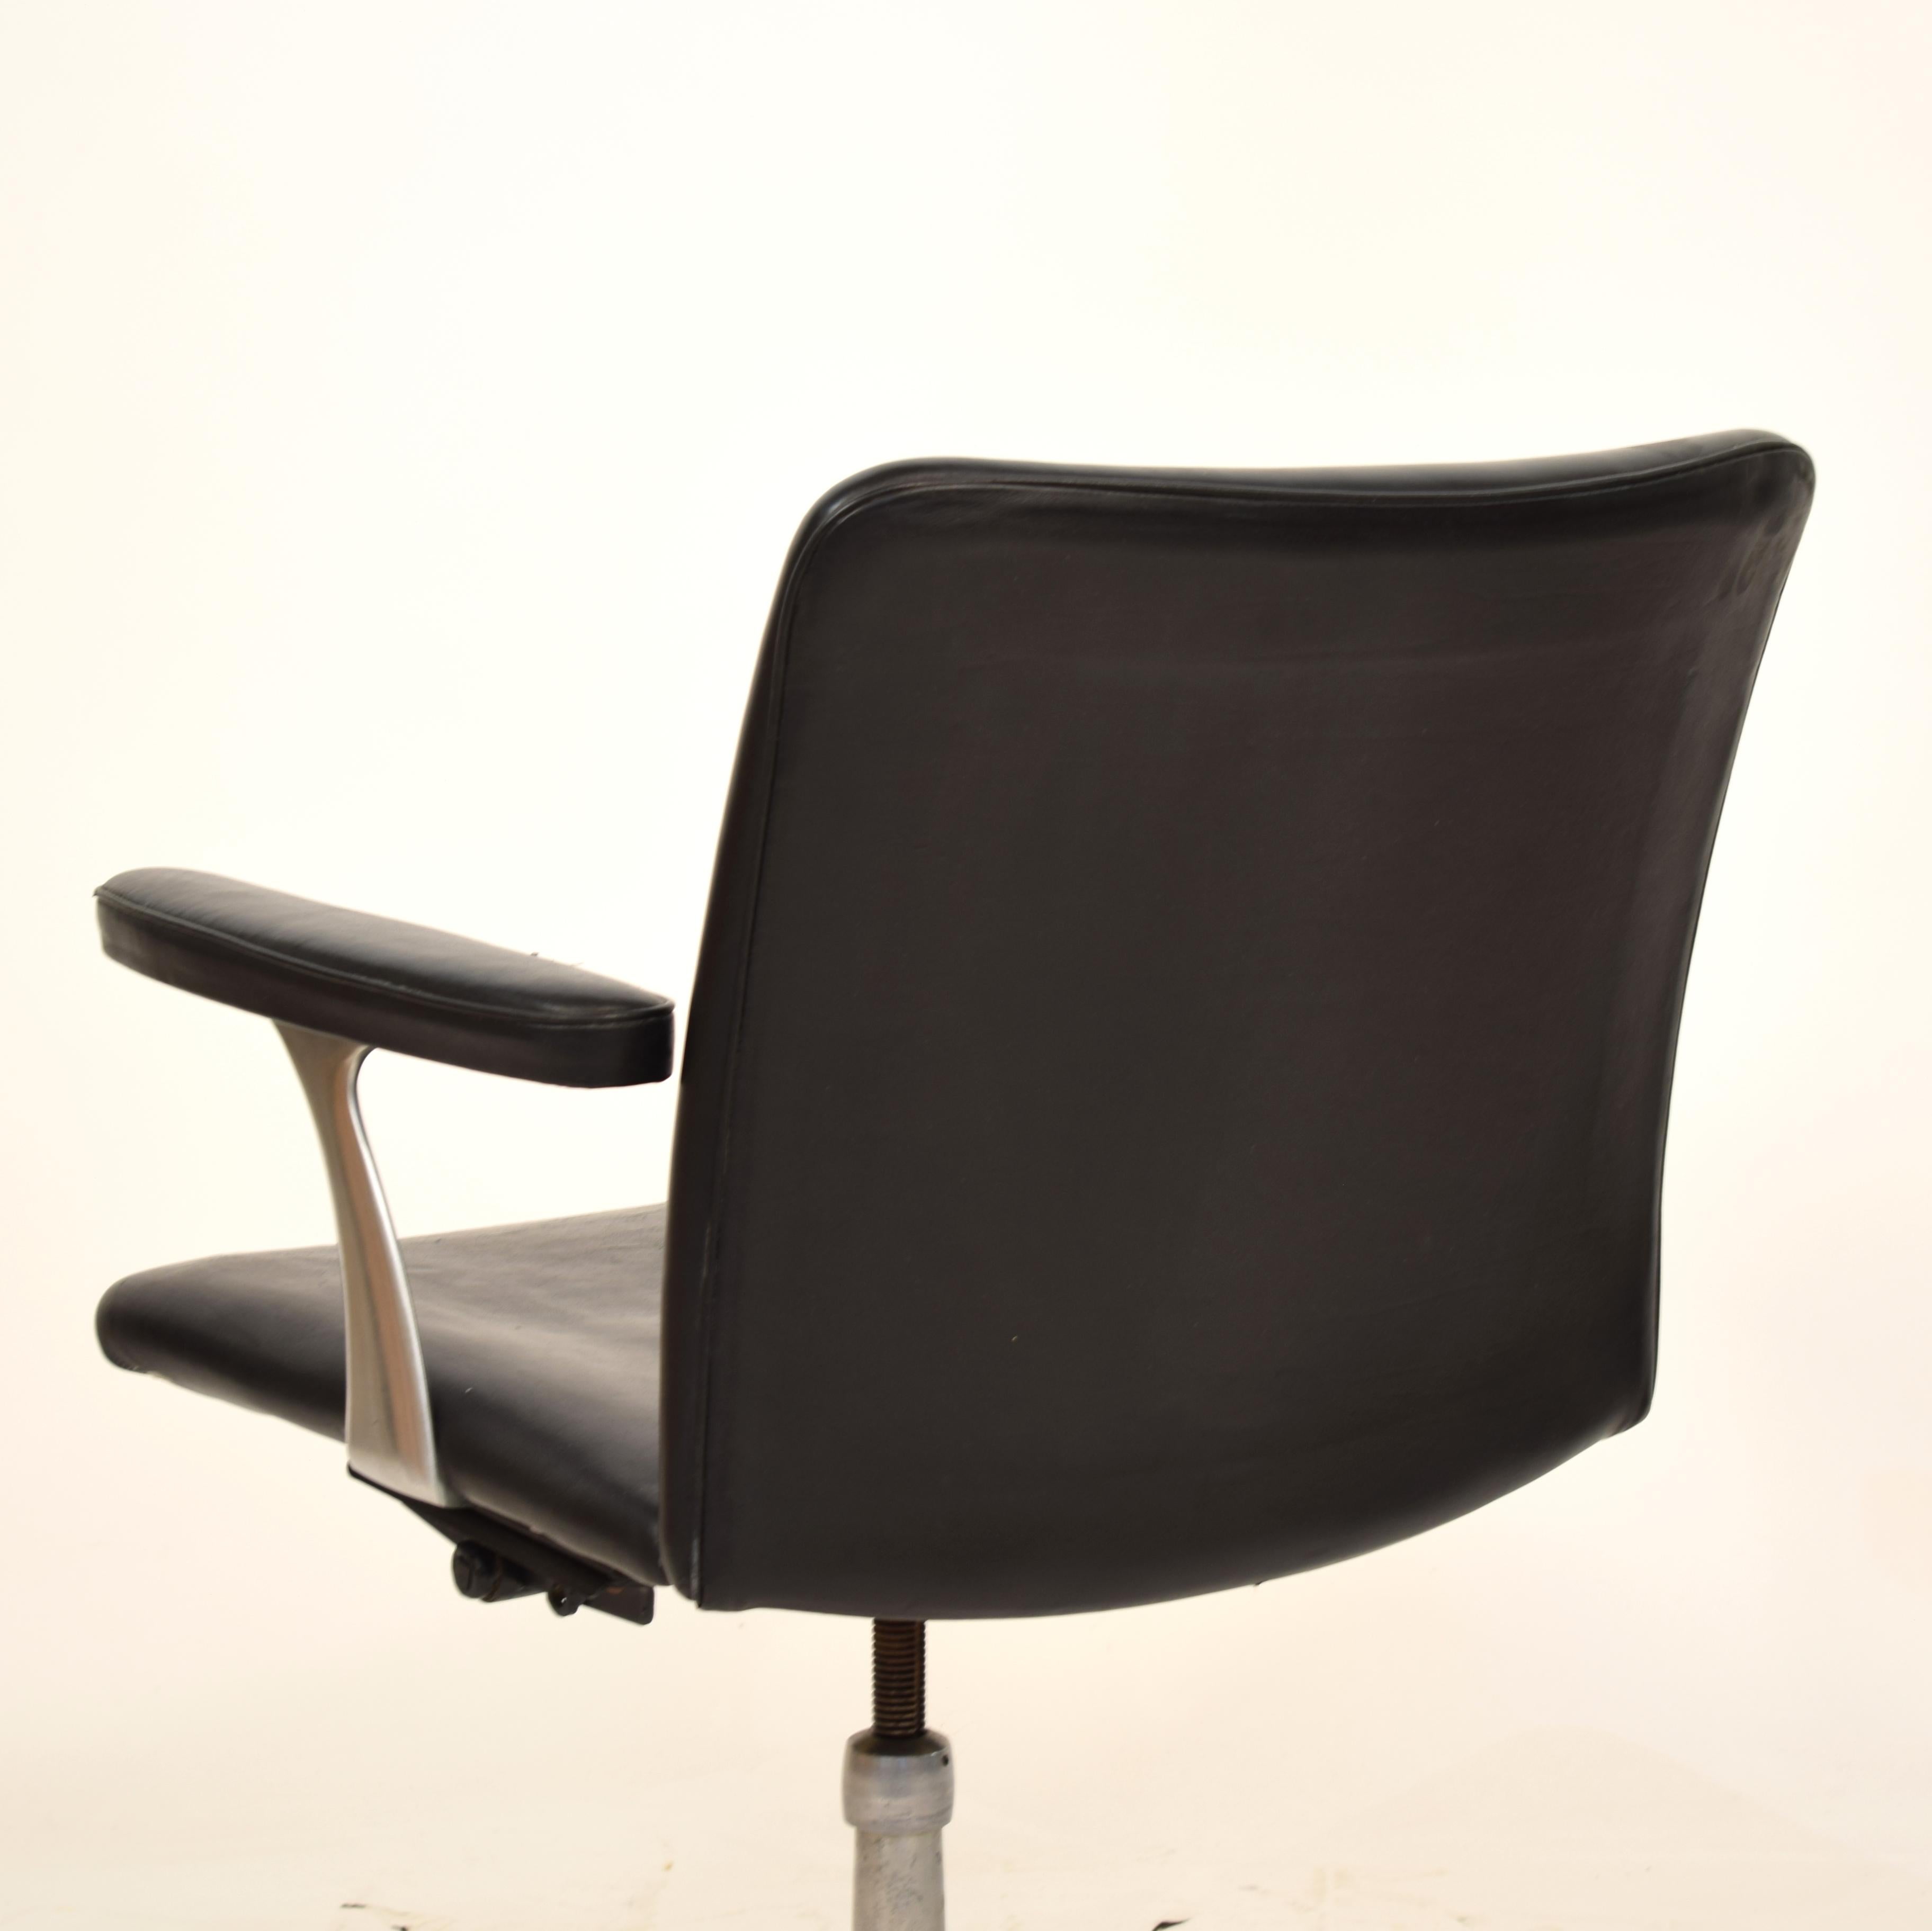 Midcentury Scandinavian Armchair in Black Leather and Aluminum, circa 1970 For Sale 1